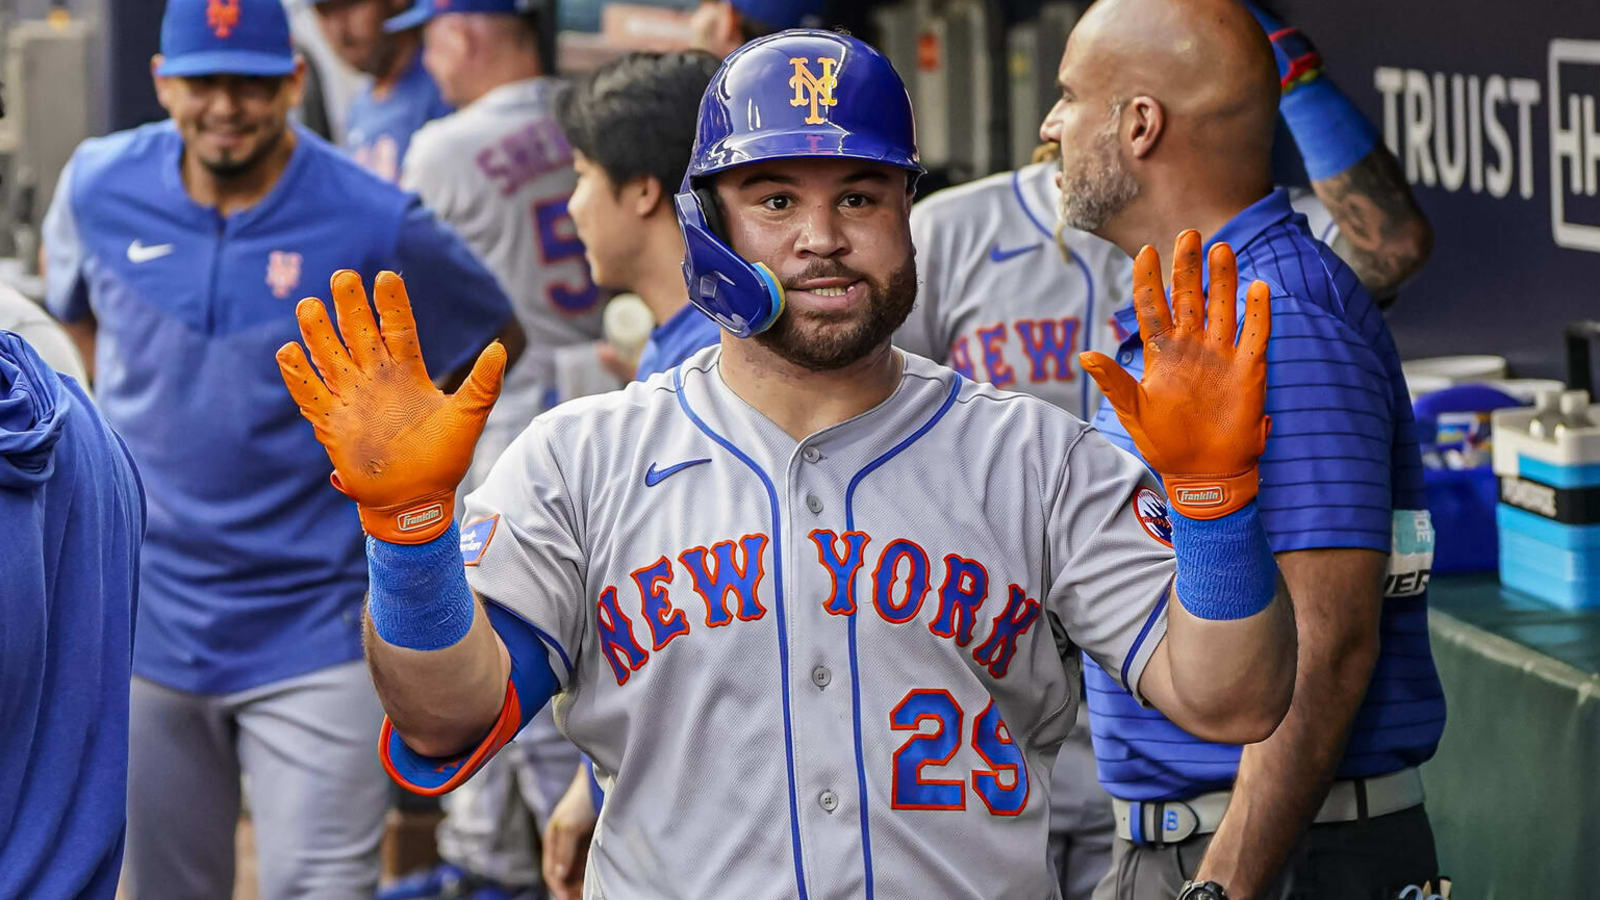 Resurgent OF solidifying role with Mets amid historic season